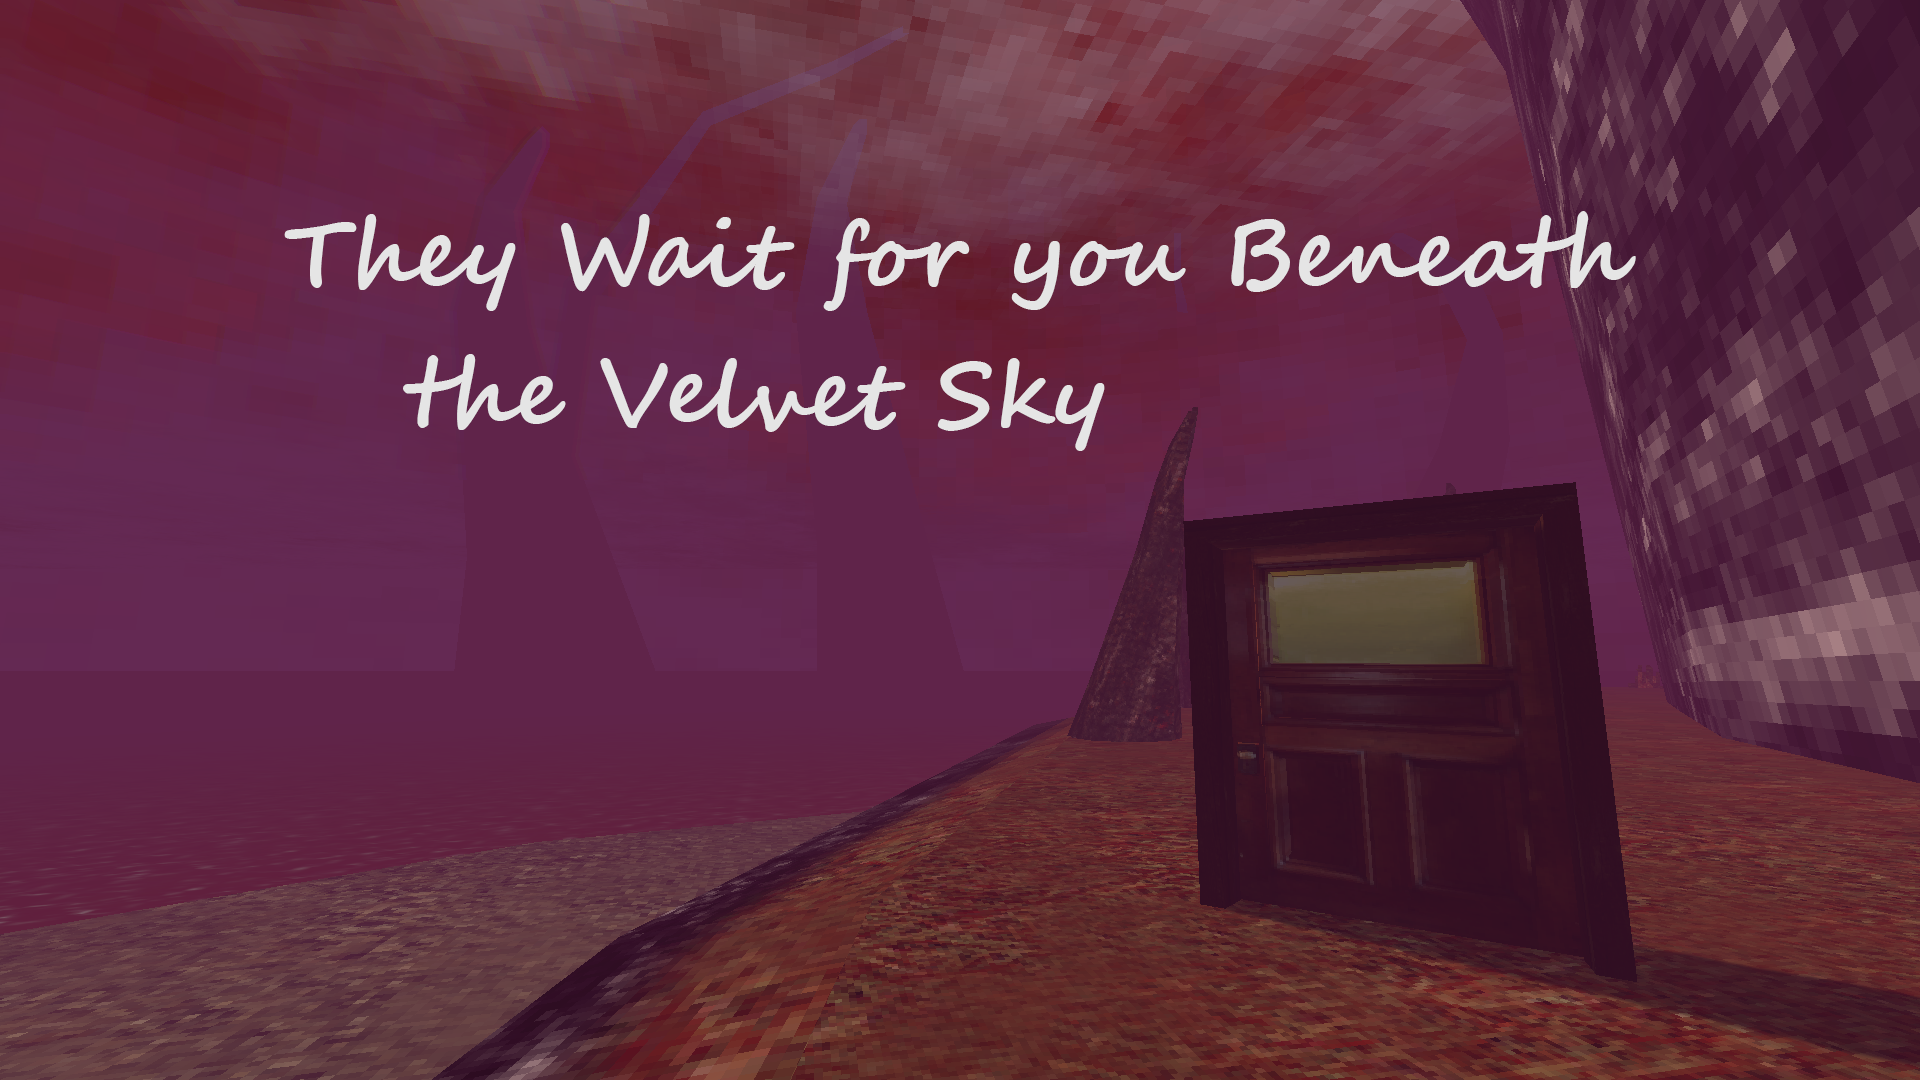 They Wait for you Beneath the Velvet Sky